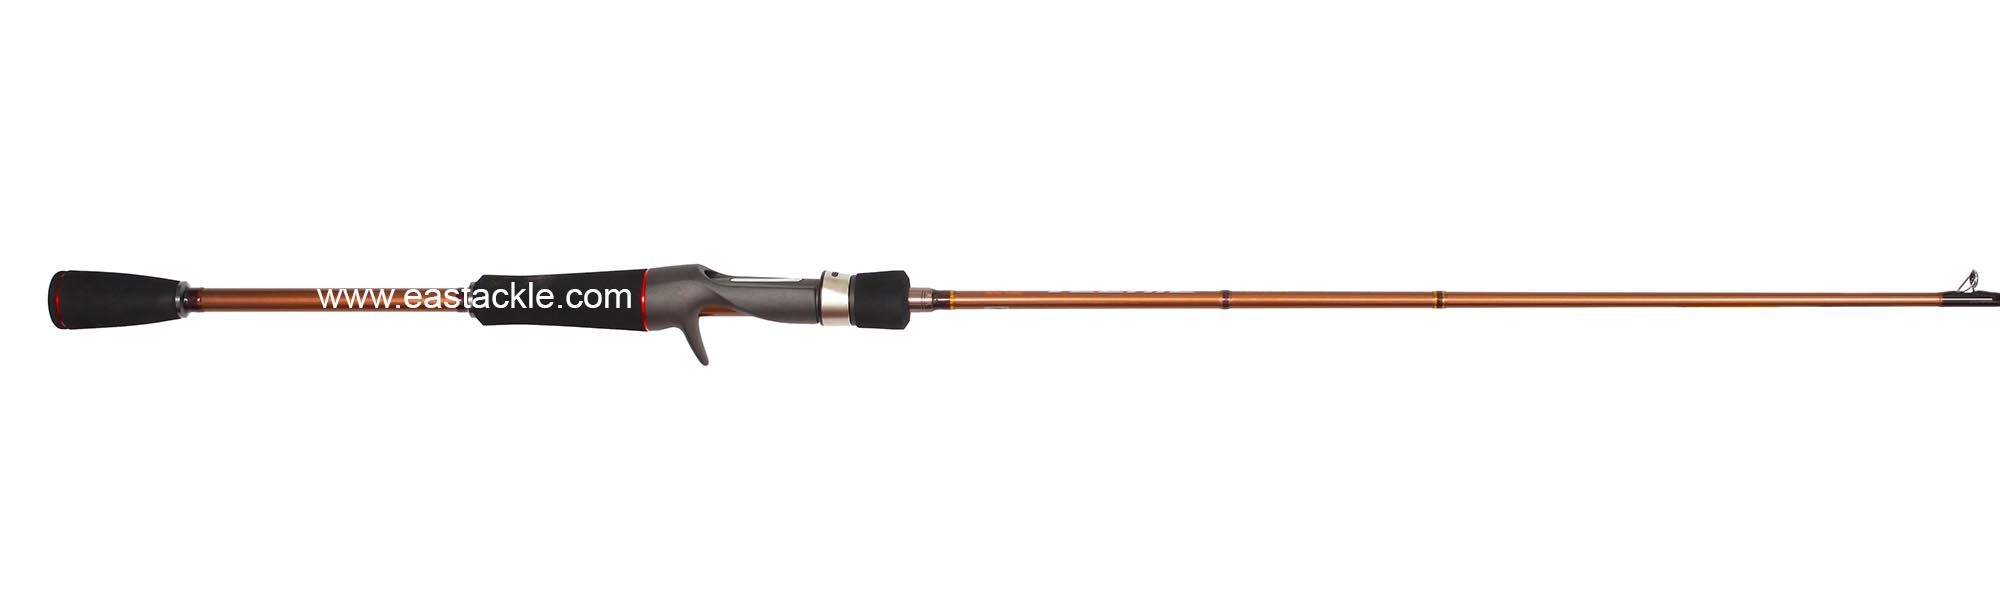 Storm - Teenie - TNC641UL - Bait Casting Rod - Butt to Stripper Guide (Side View) | Eastackle